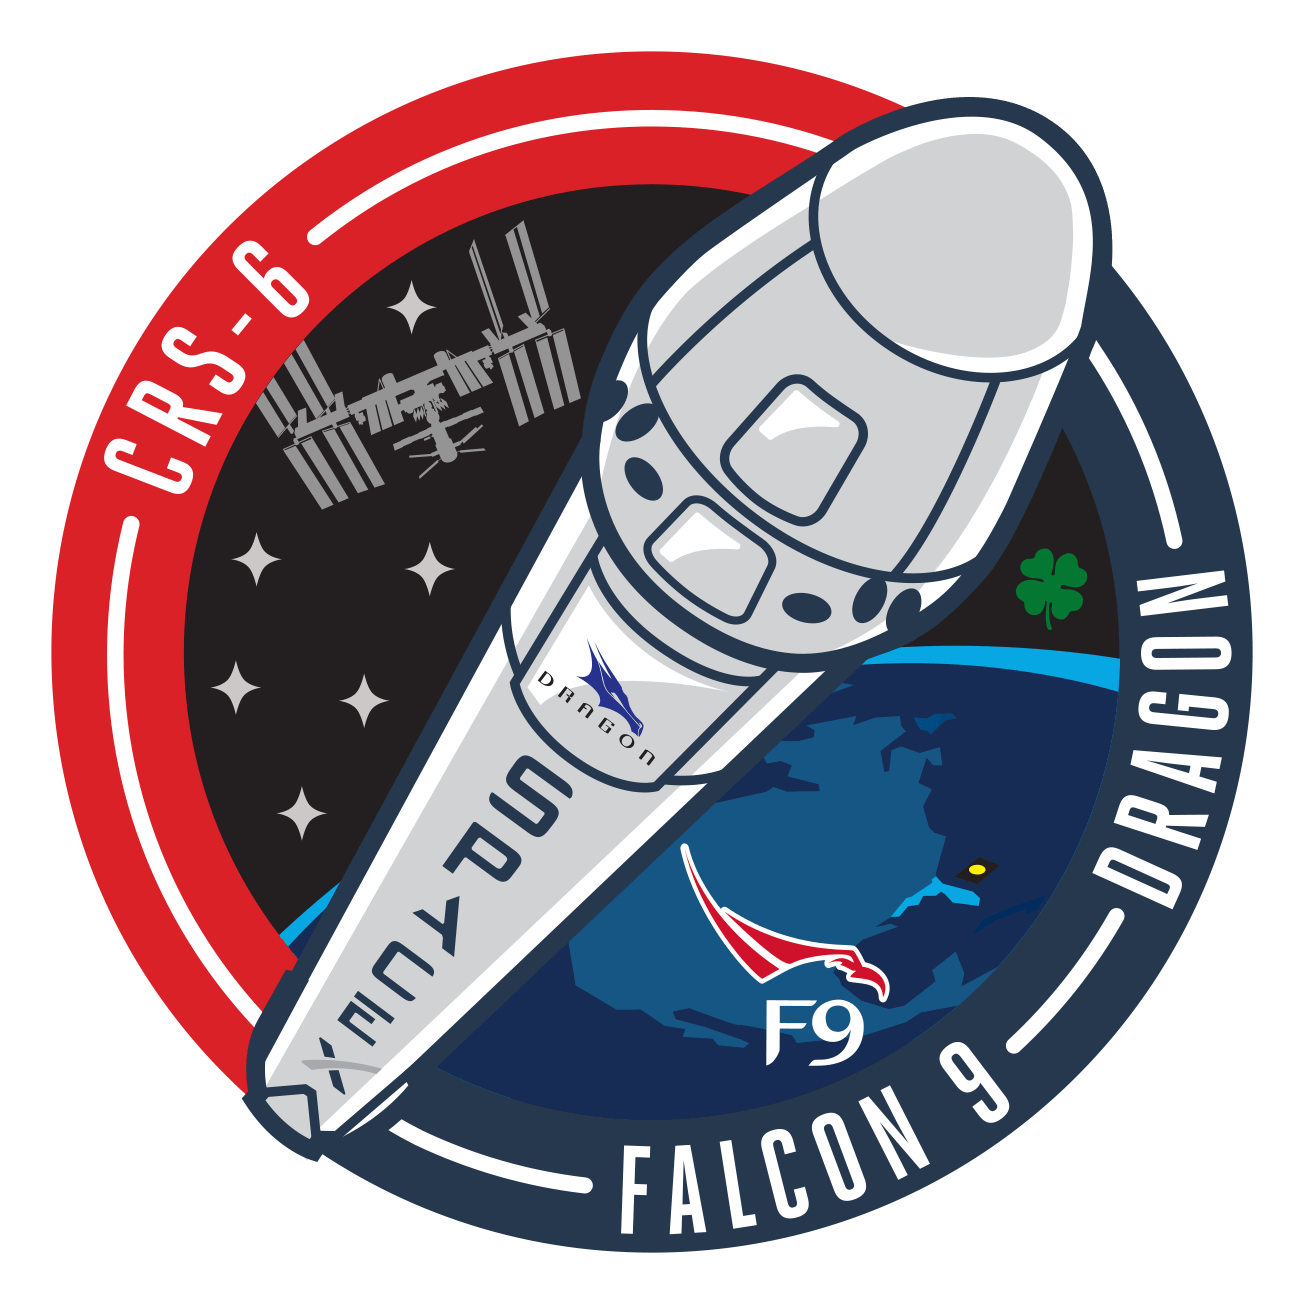 10 Mission SpaceX Logo - Information about Mission Patch Spacex Crs 1